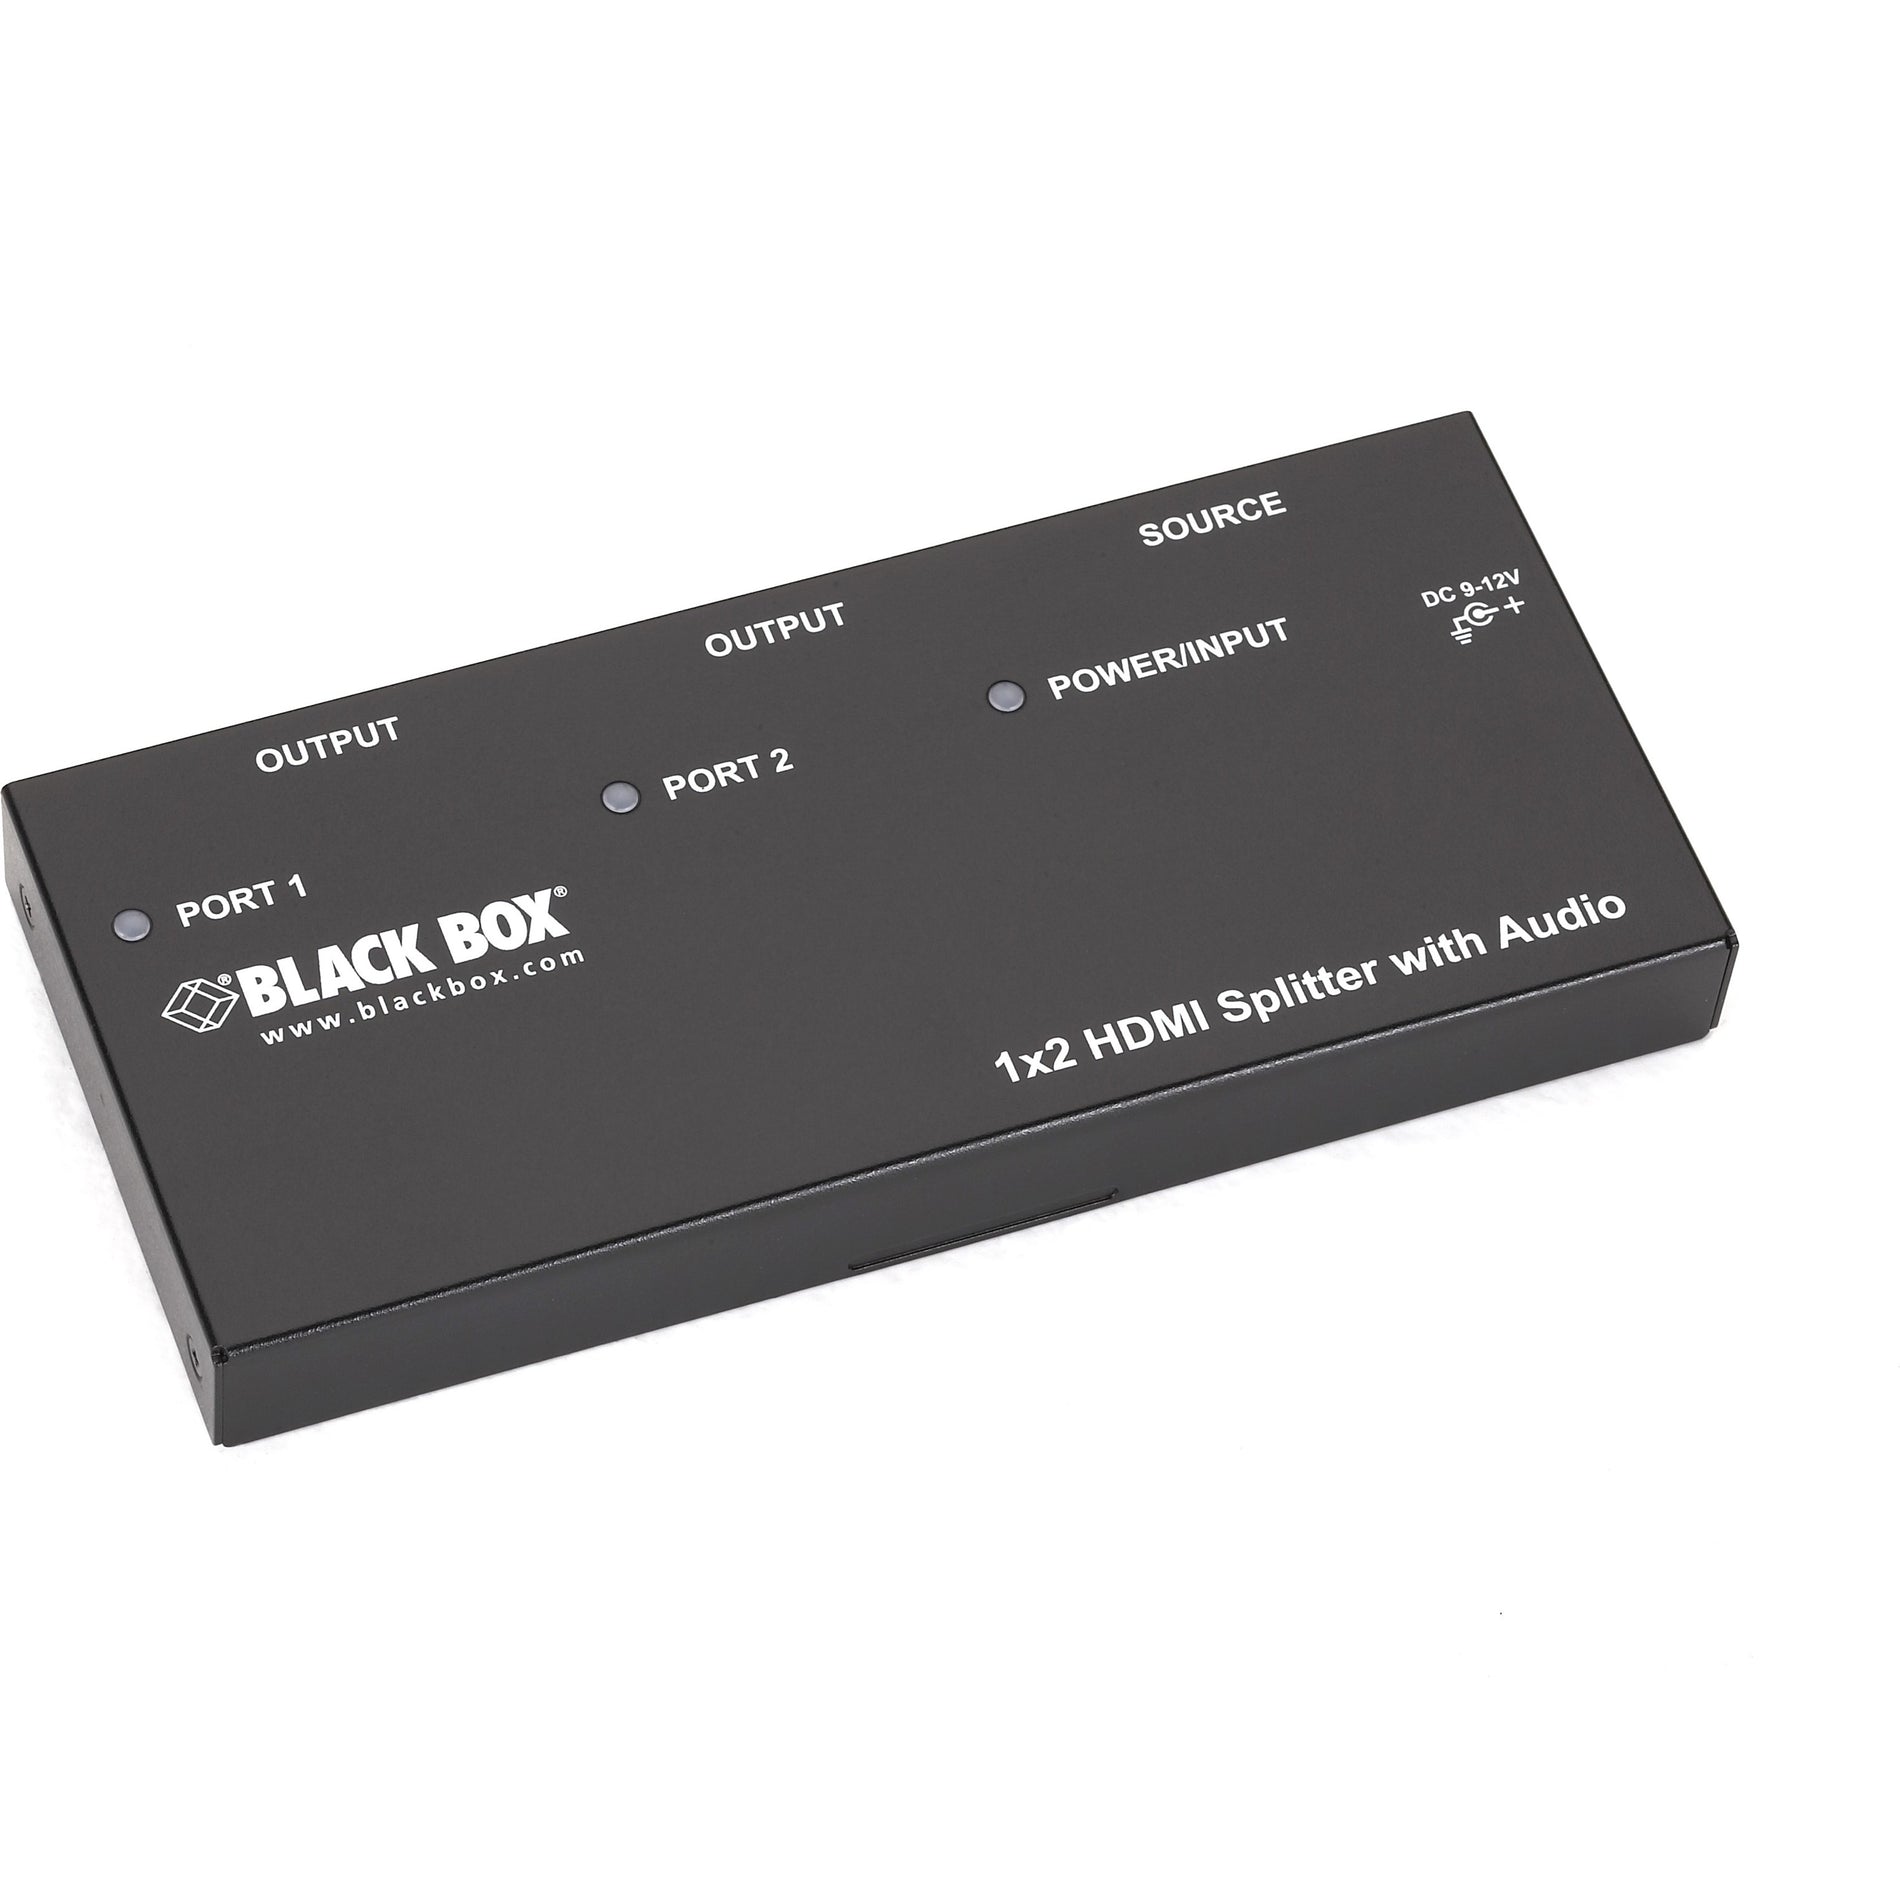 Black Box AVSP-HDMI1X2 1 x 2 HDMI Splitter with Audio, Fully HDCP Compliant, Blu-ray Ready, Simple to Set Up